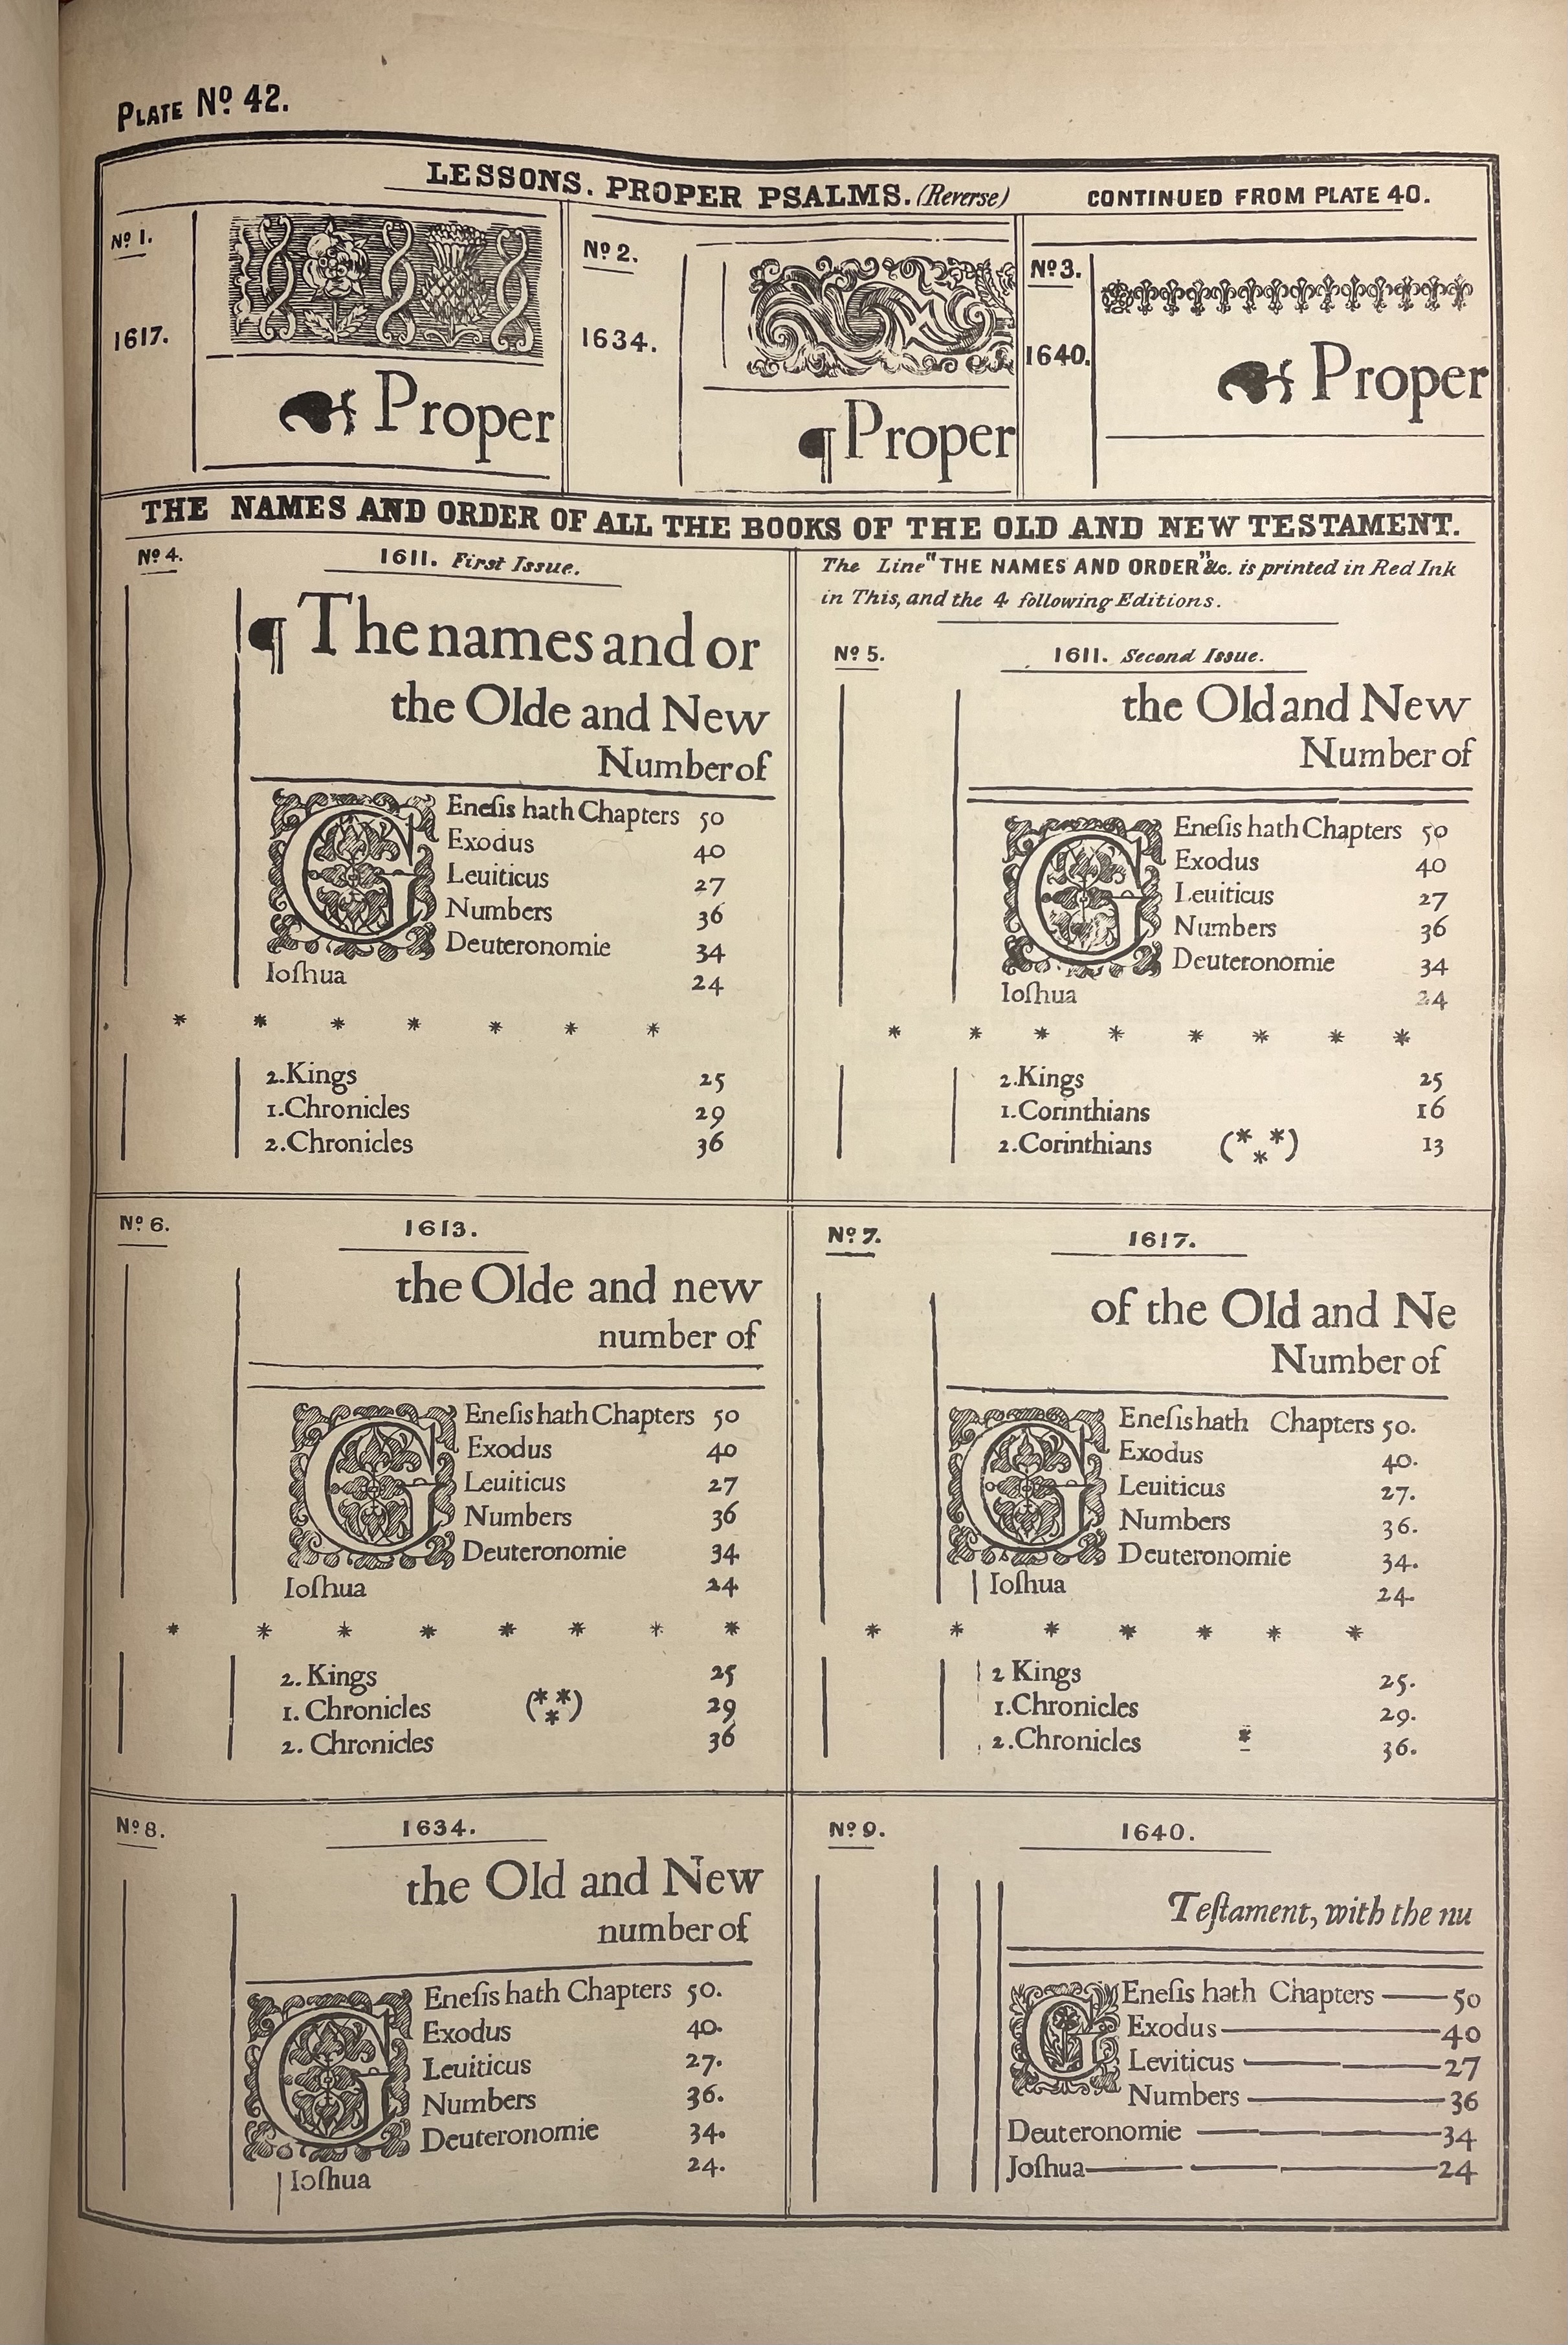 Page of several facsimiles showing portions of printed pages arranged in a grid for comparison